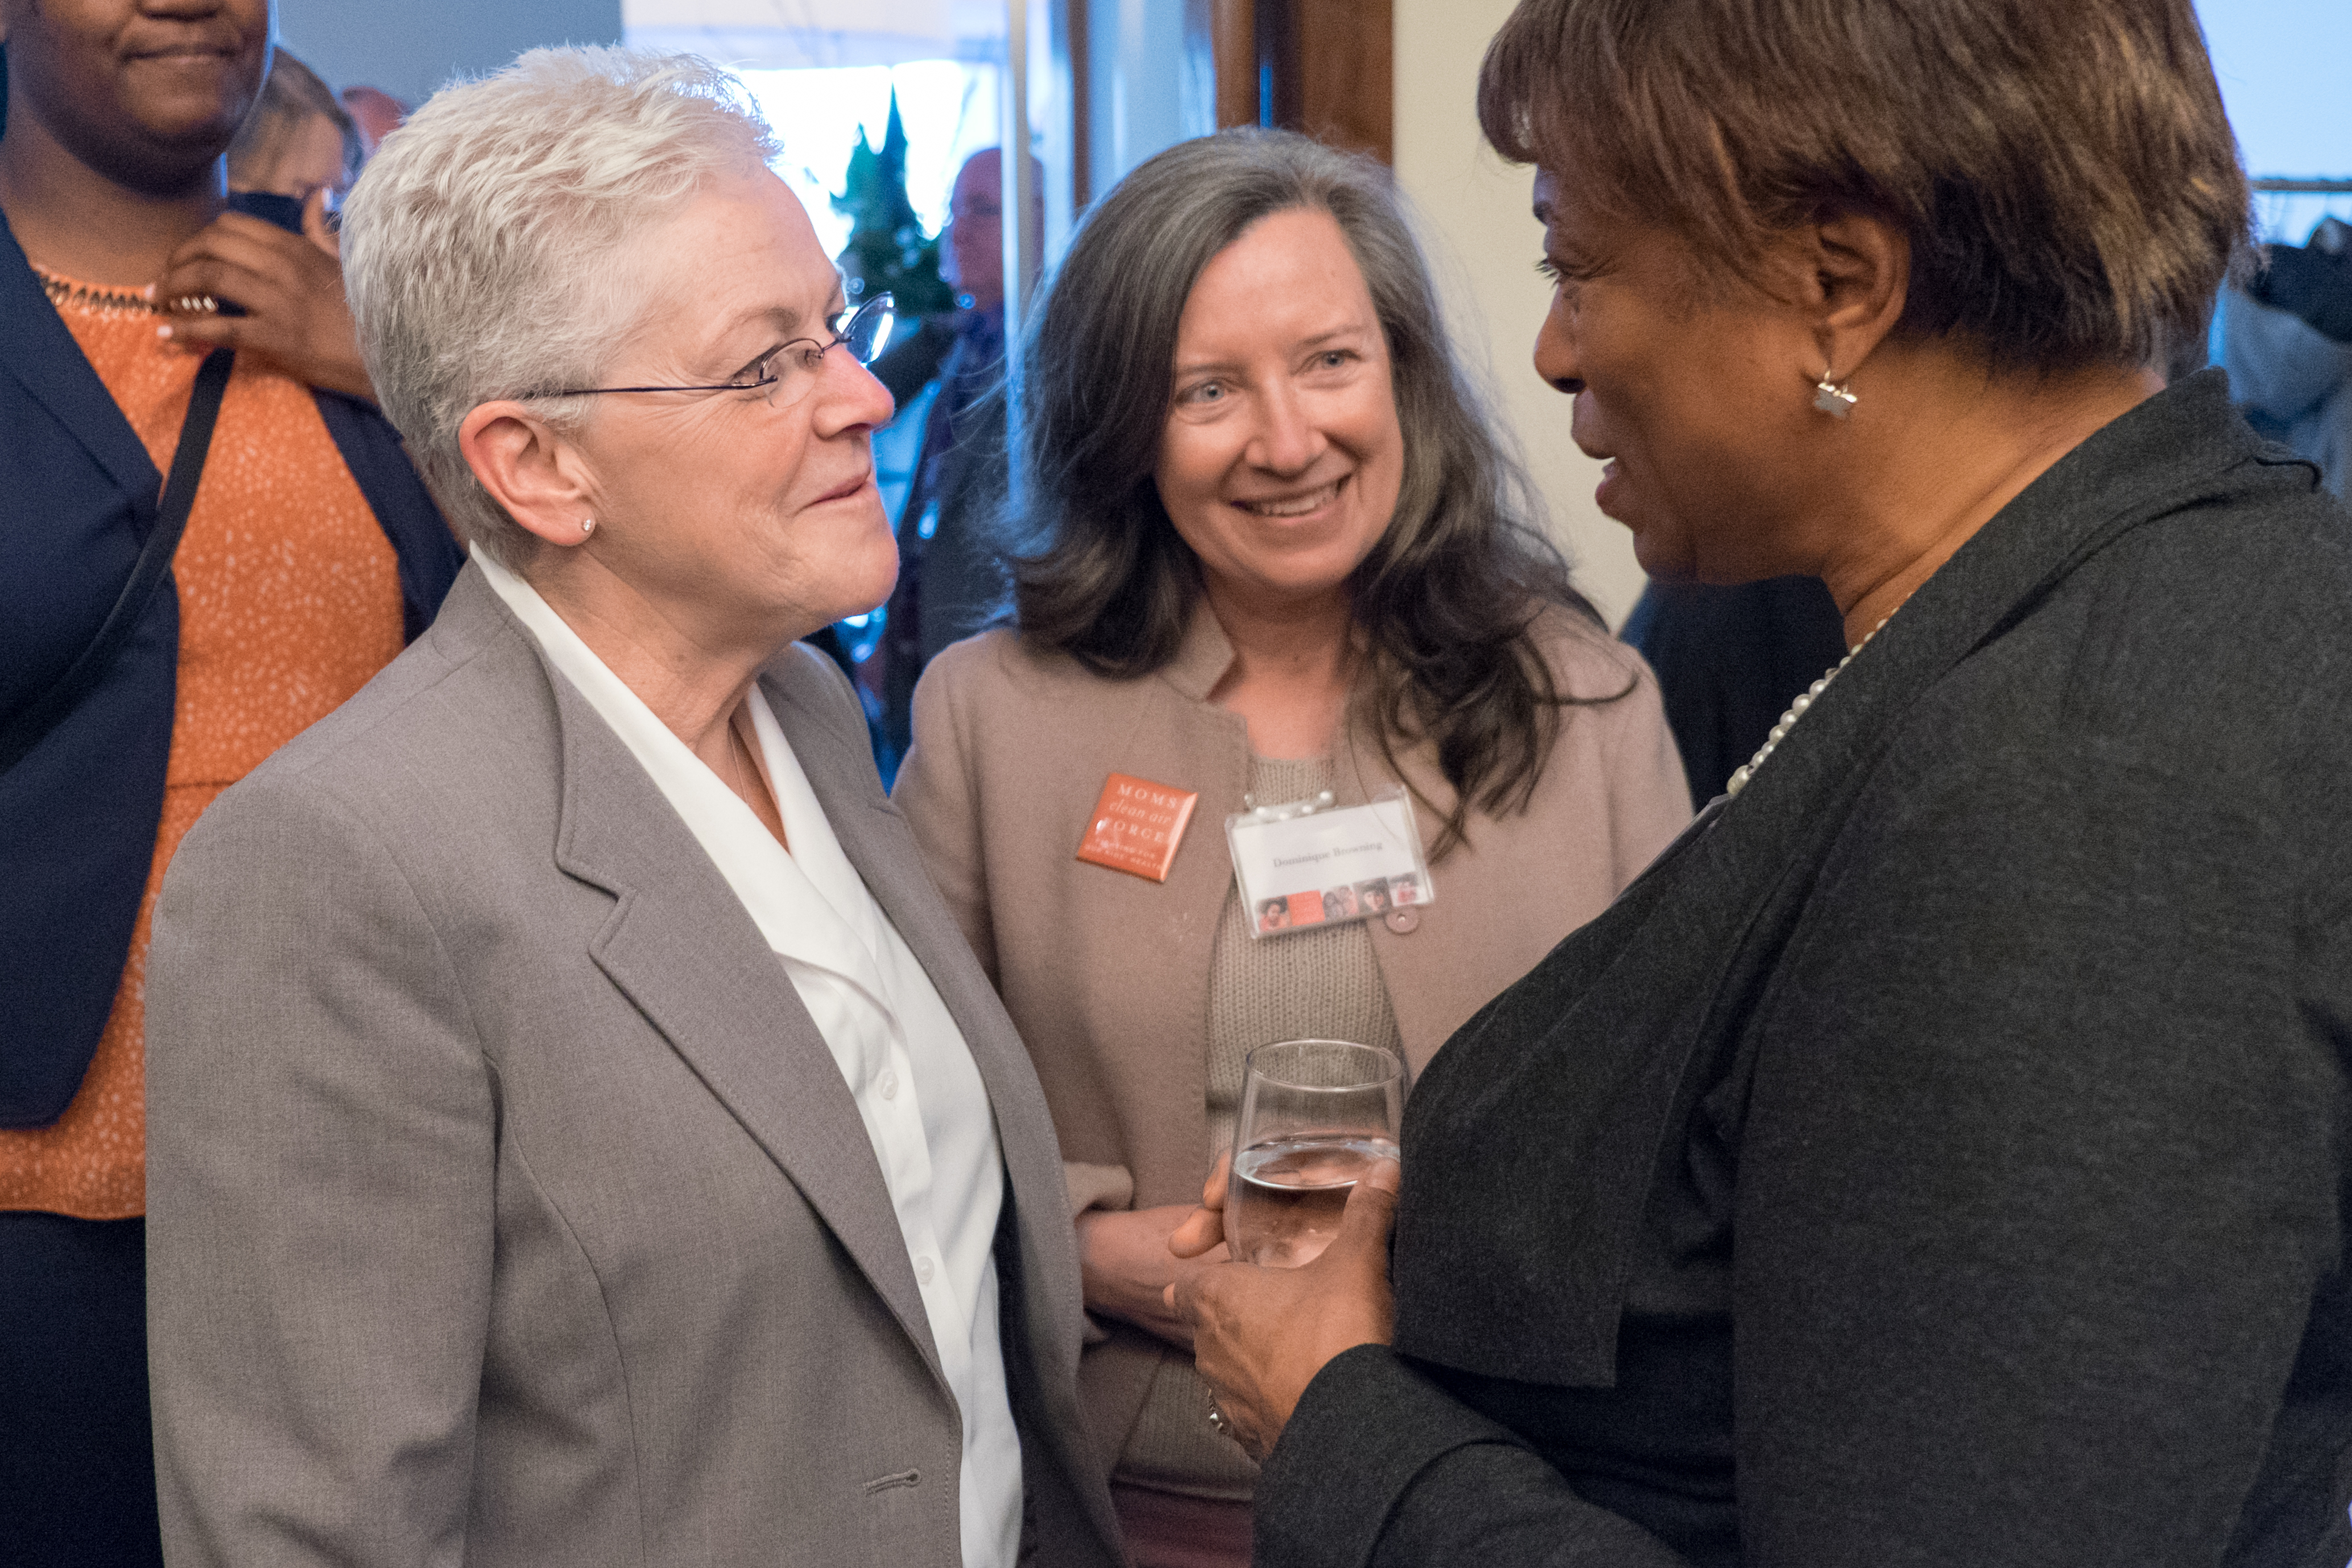 Representative Brenda Lawrence, Dominique Browning and Administrator McCarthy